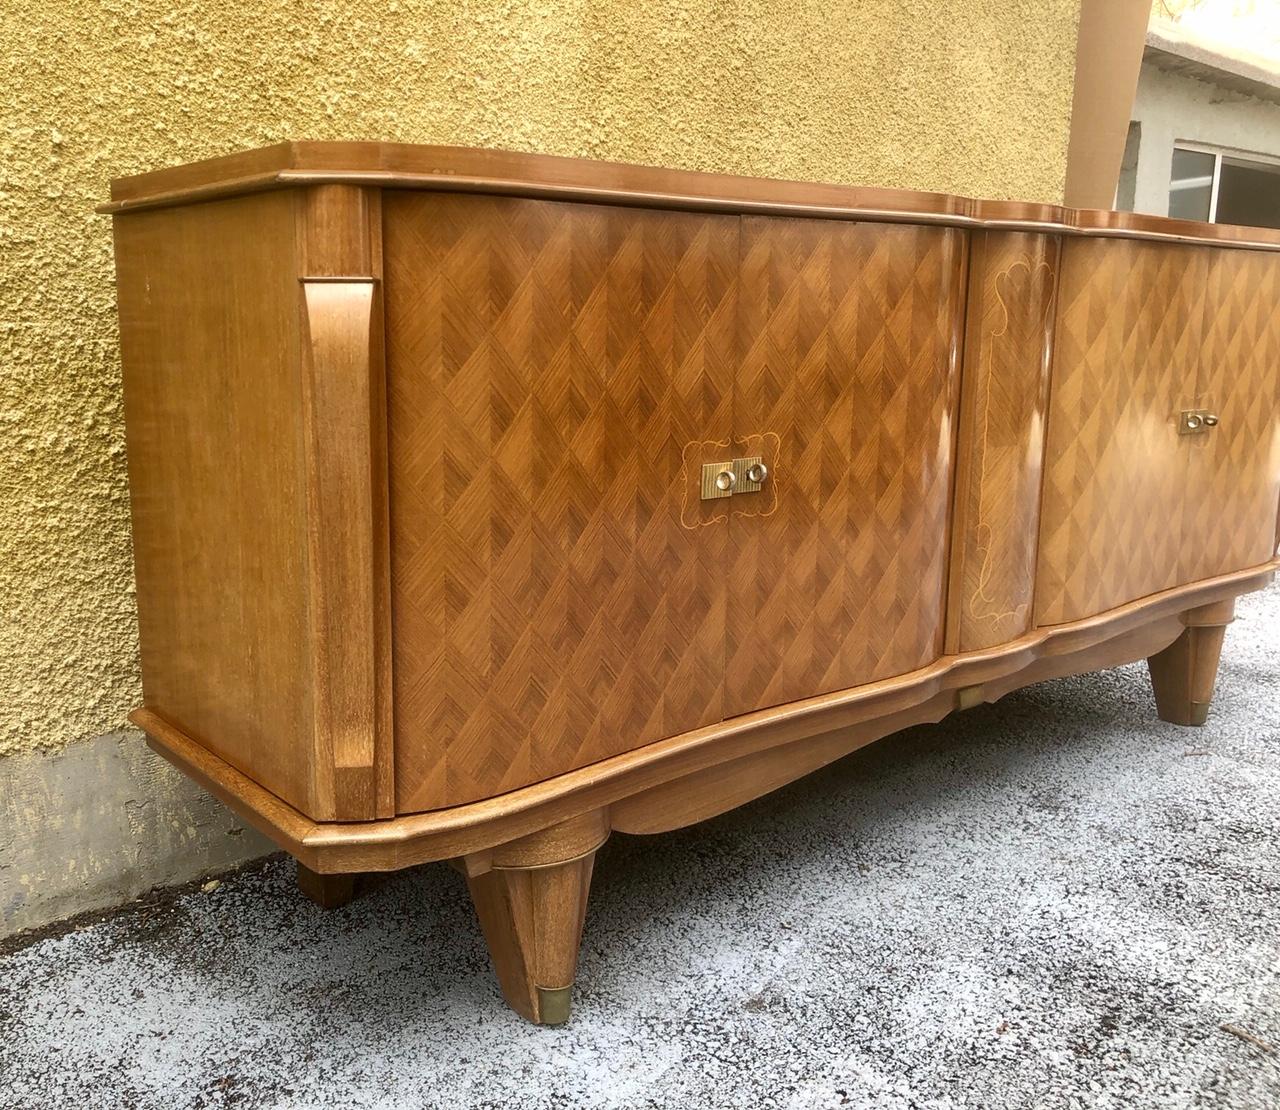 This sideboard was made in France in the 1940s in the famous furniture house of Art Deco designer - Jules Leleu. The decorative elements on the doors are executed in the typical diamond marquetry manner. The buffet has not been restored due to the